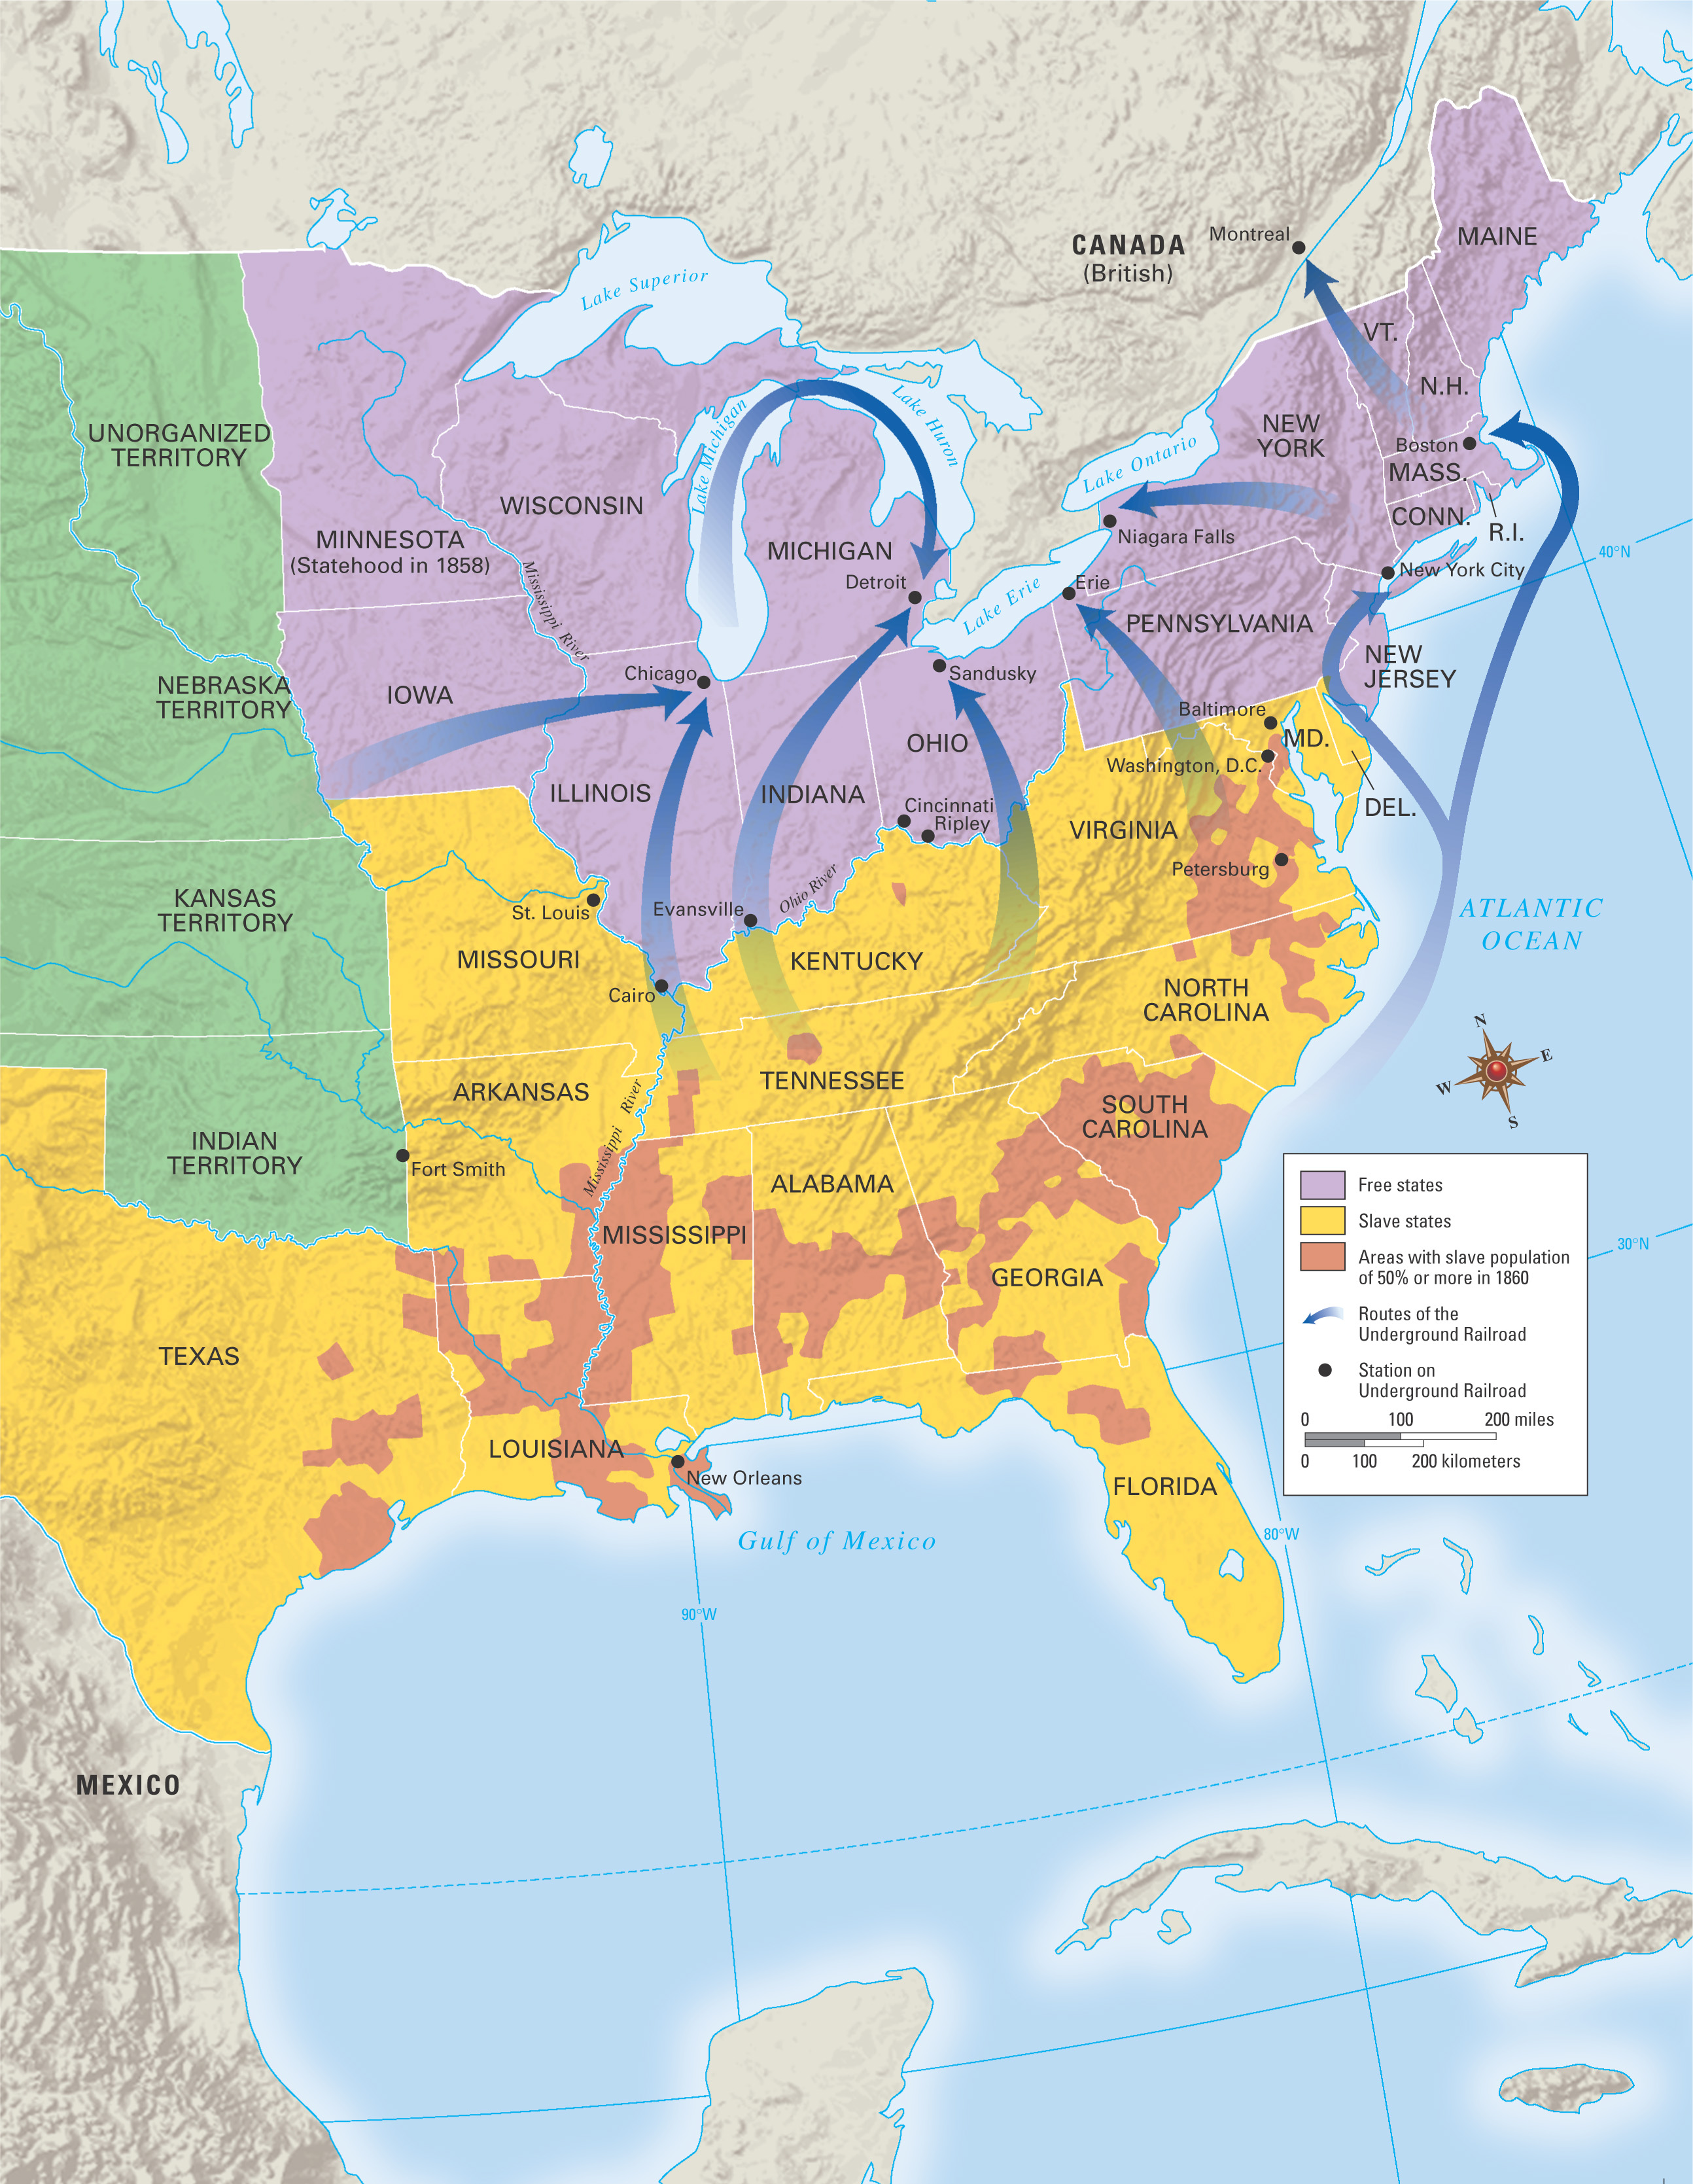 A map of the U.S. shows the routes of the Underground Railroad.